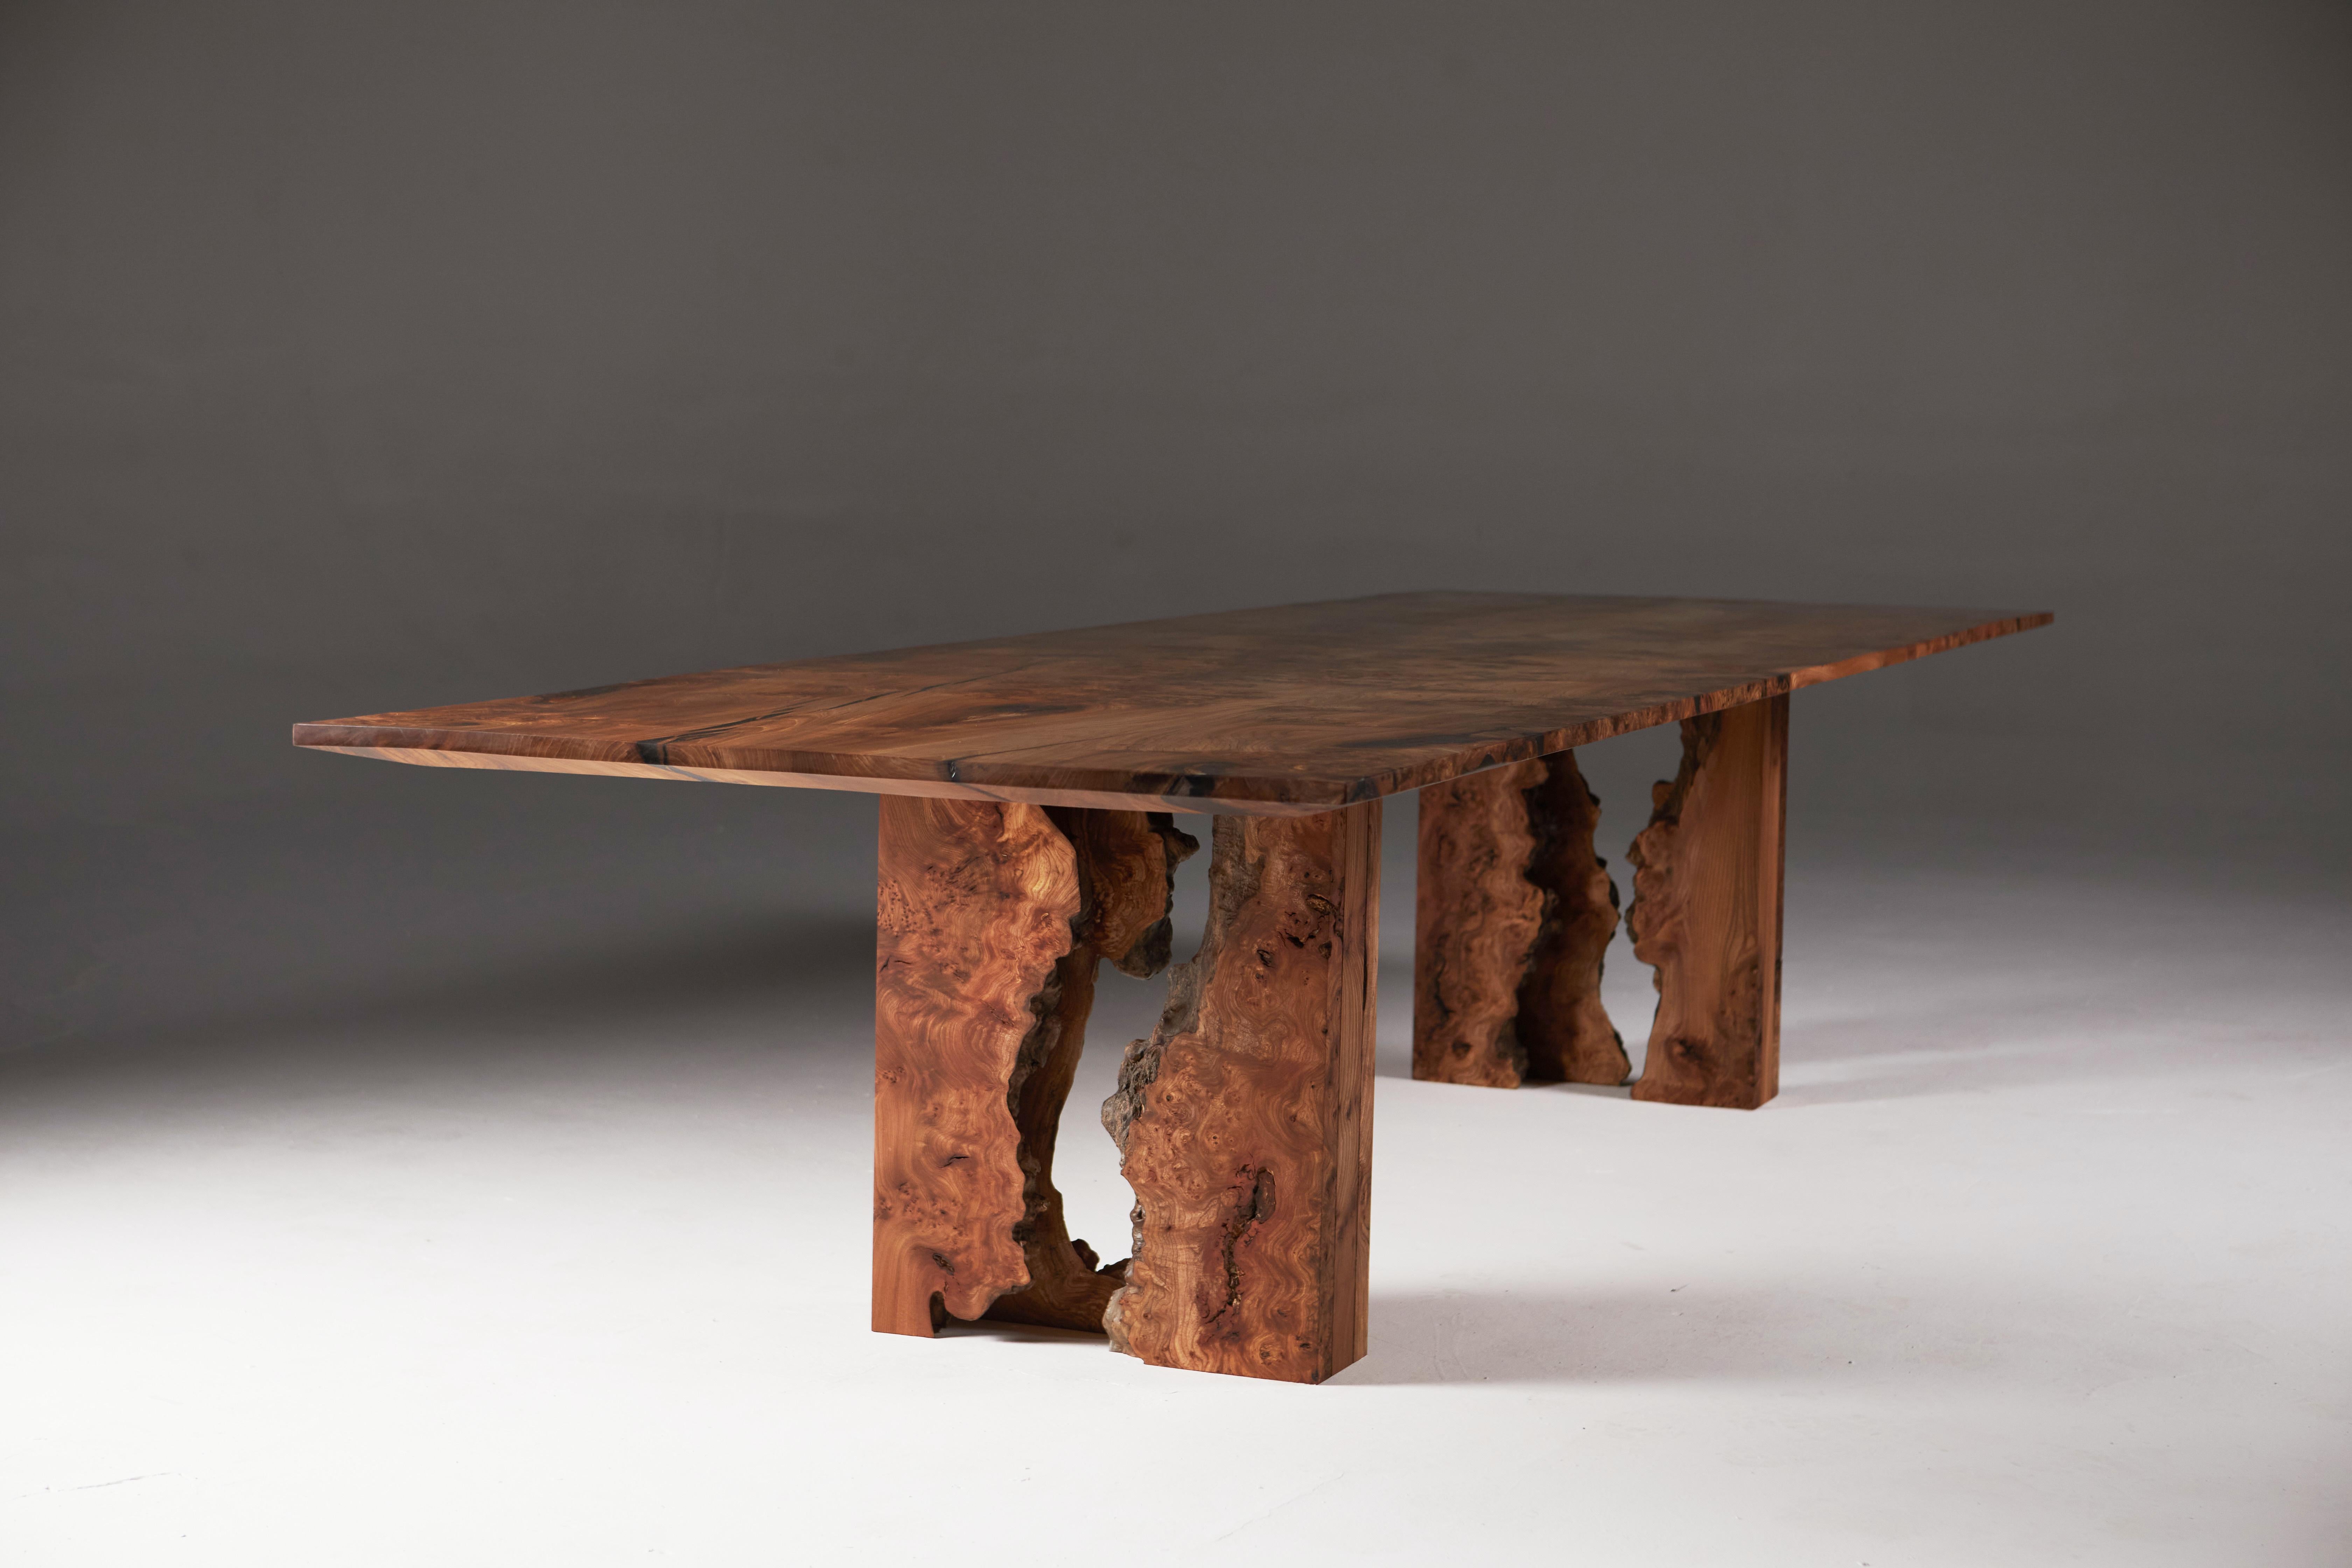 Scottish Burr Elm Table with Inverted Live Edge Legs and Book-matched Top.  4